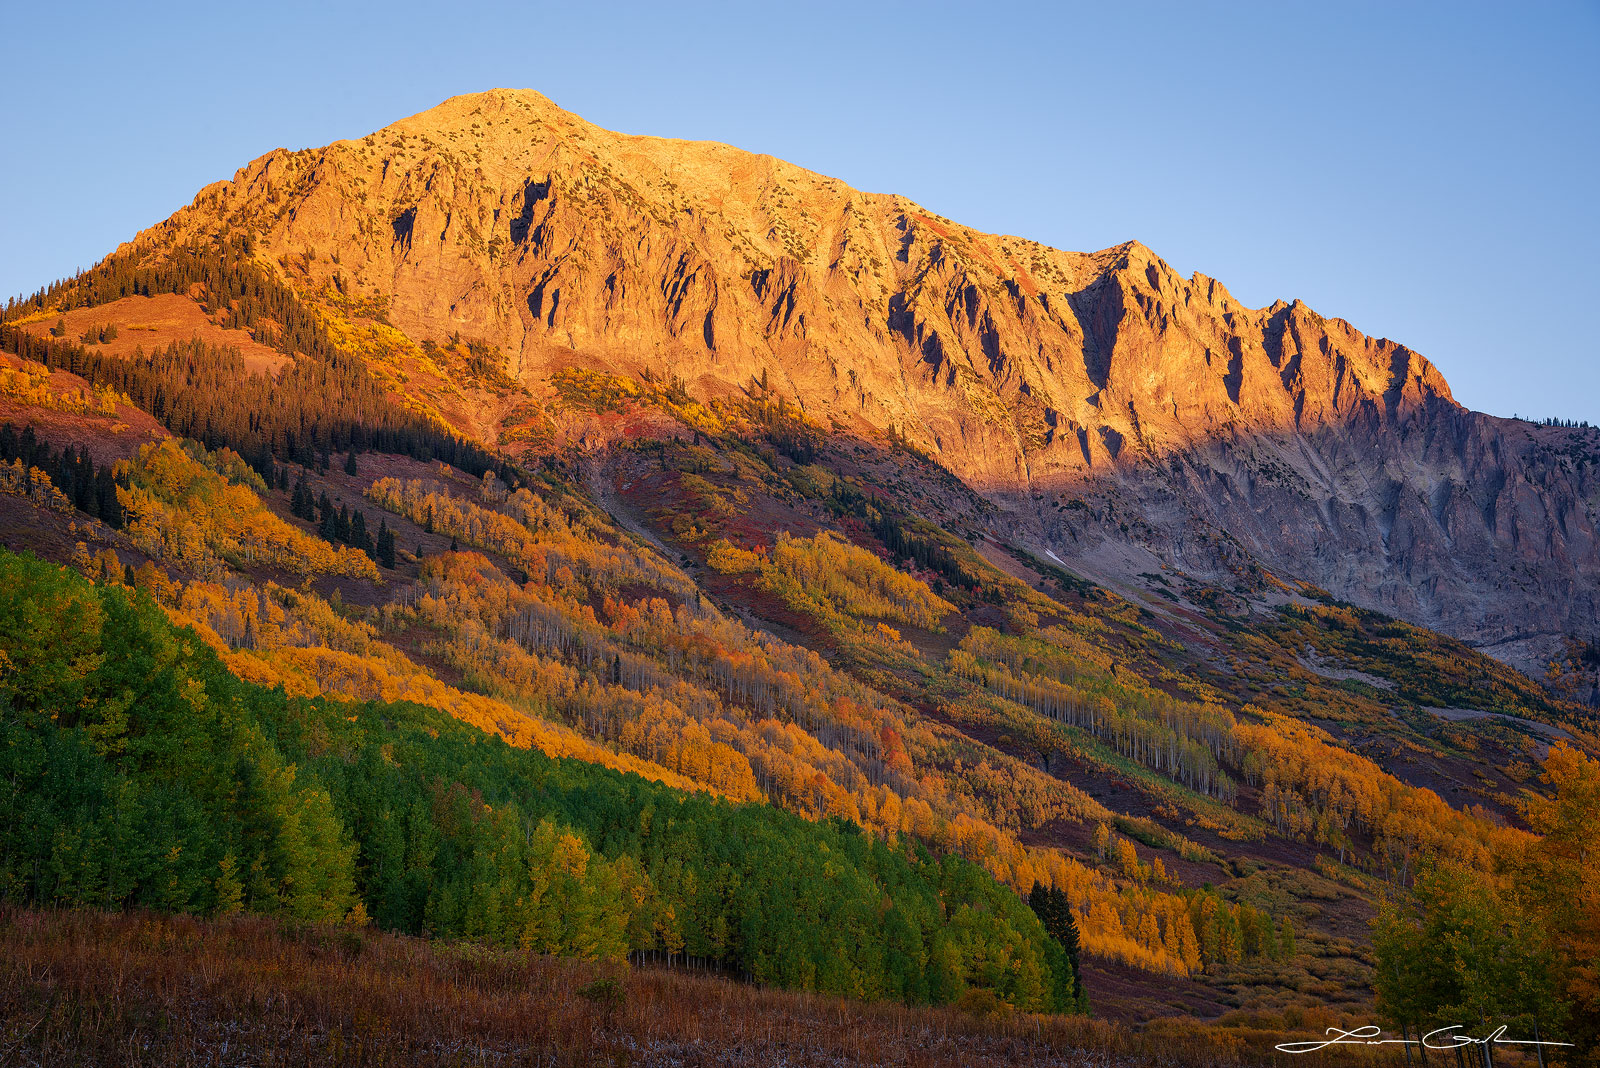 Gothic Mountain in Crested Butte, Colorado, displaying stunning Aspen Mountain landscape during fall with vibrant aspen trees, a masterpiece captured at sunrise. - Gintchin Fine Art